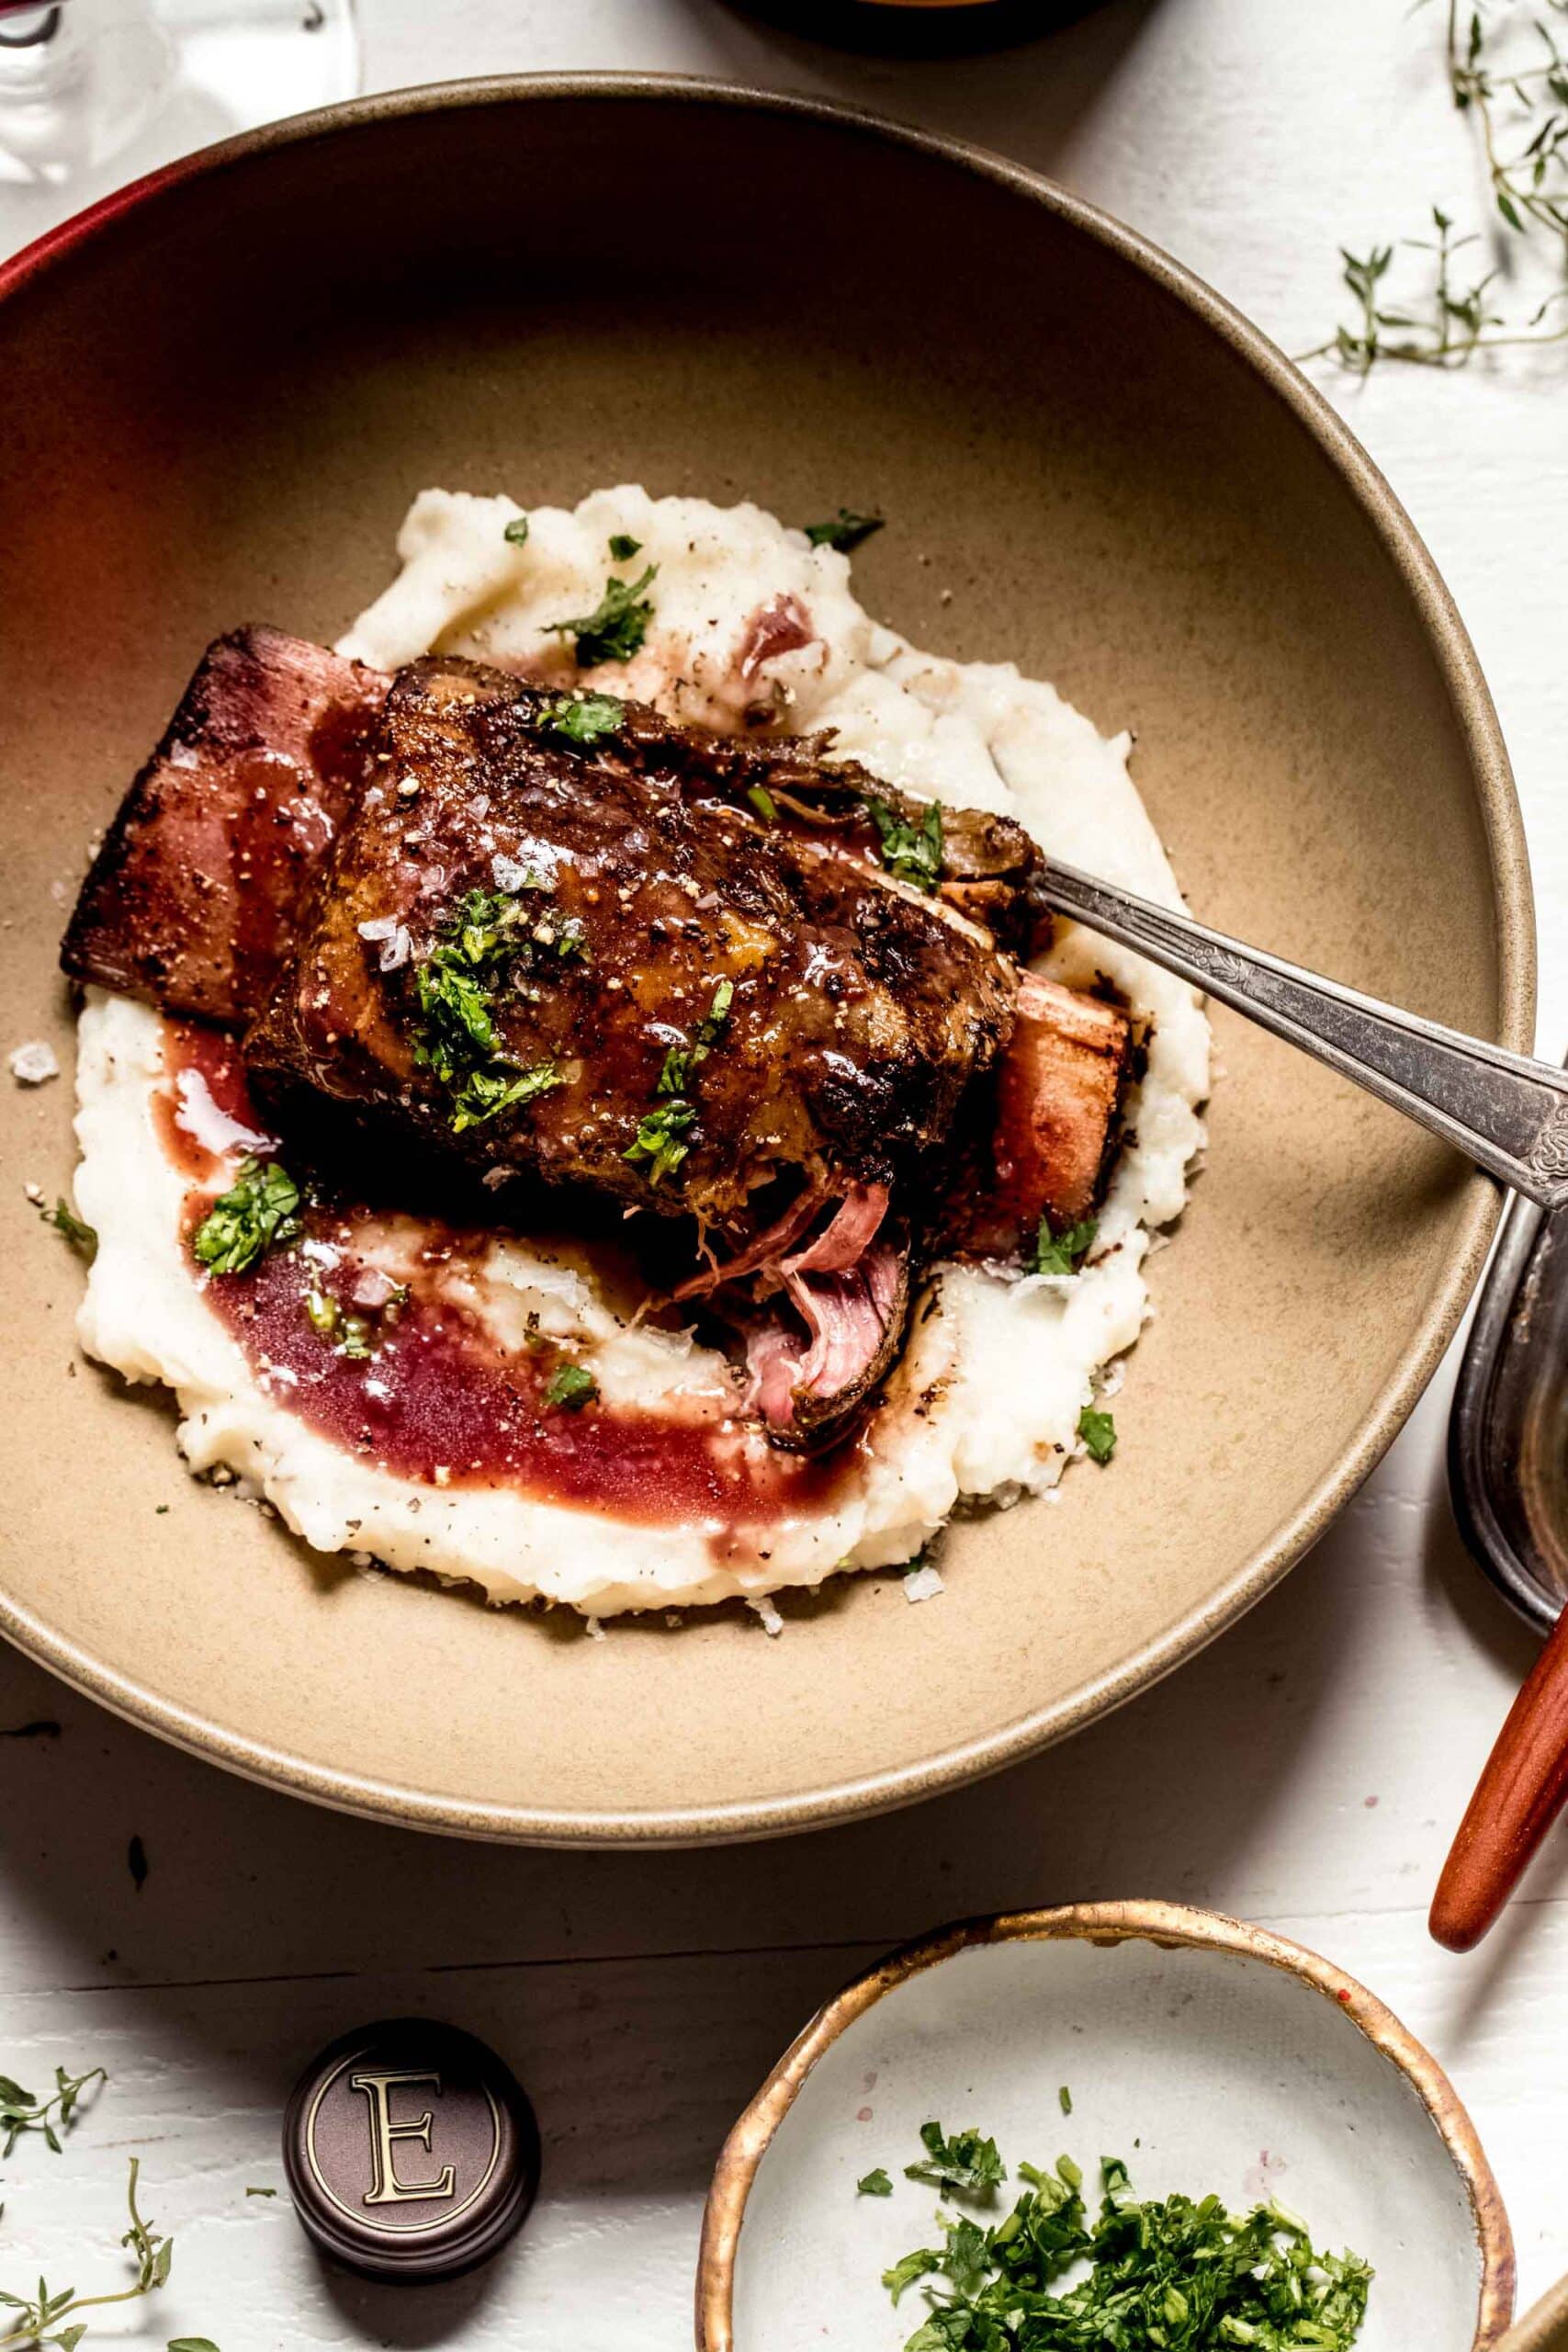 Overhead shot of short rib in brown bowl with mashed potatoes and red wine sauce.